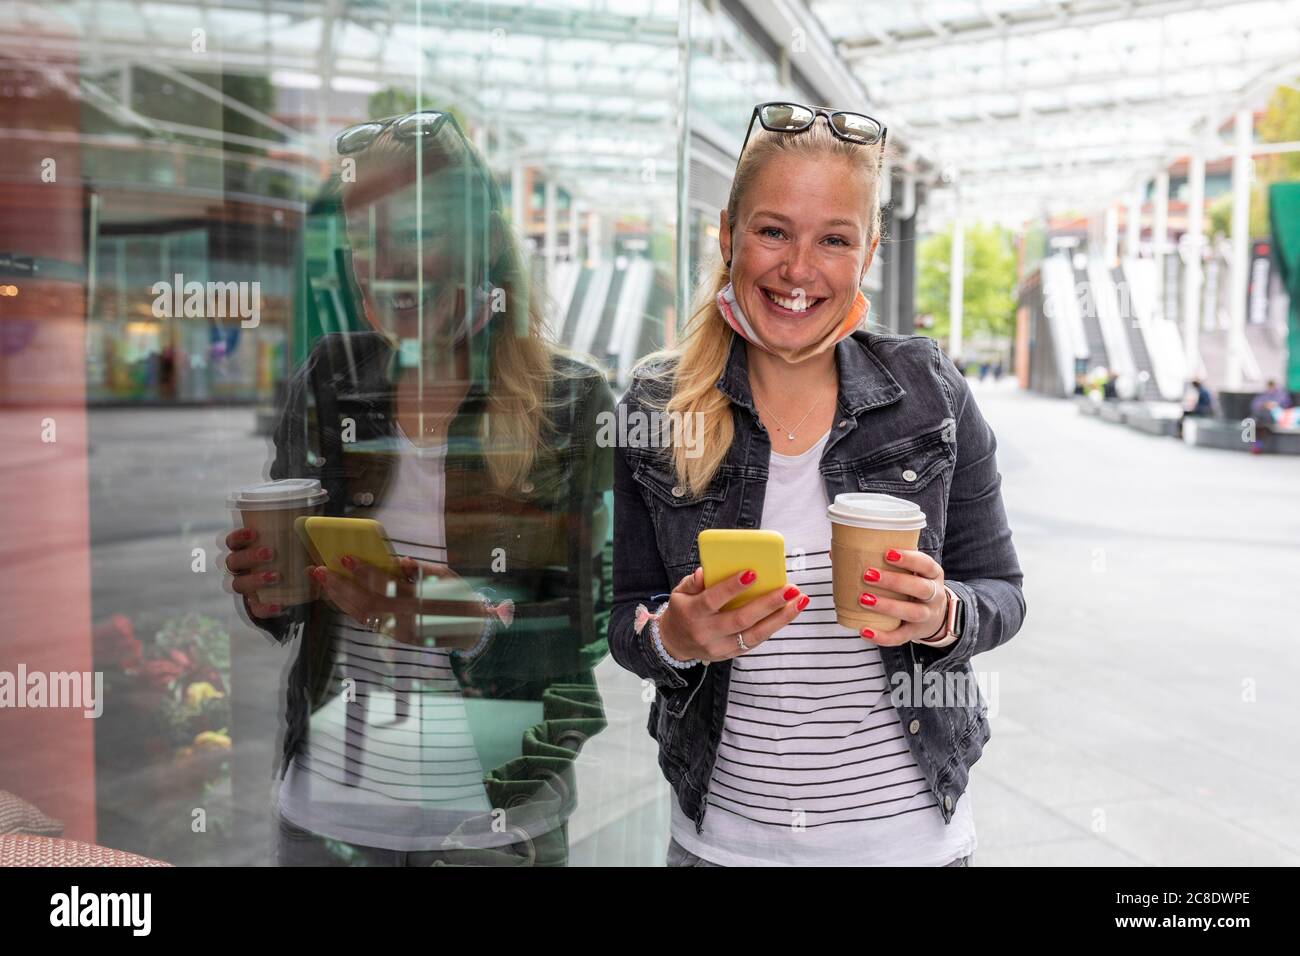 Smiling woman holding coffee cup using smart phone while standing on sidewalk in city Stock Photo